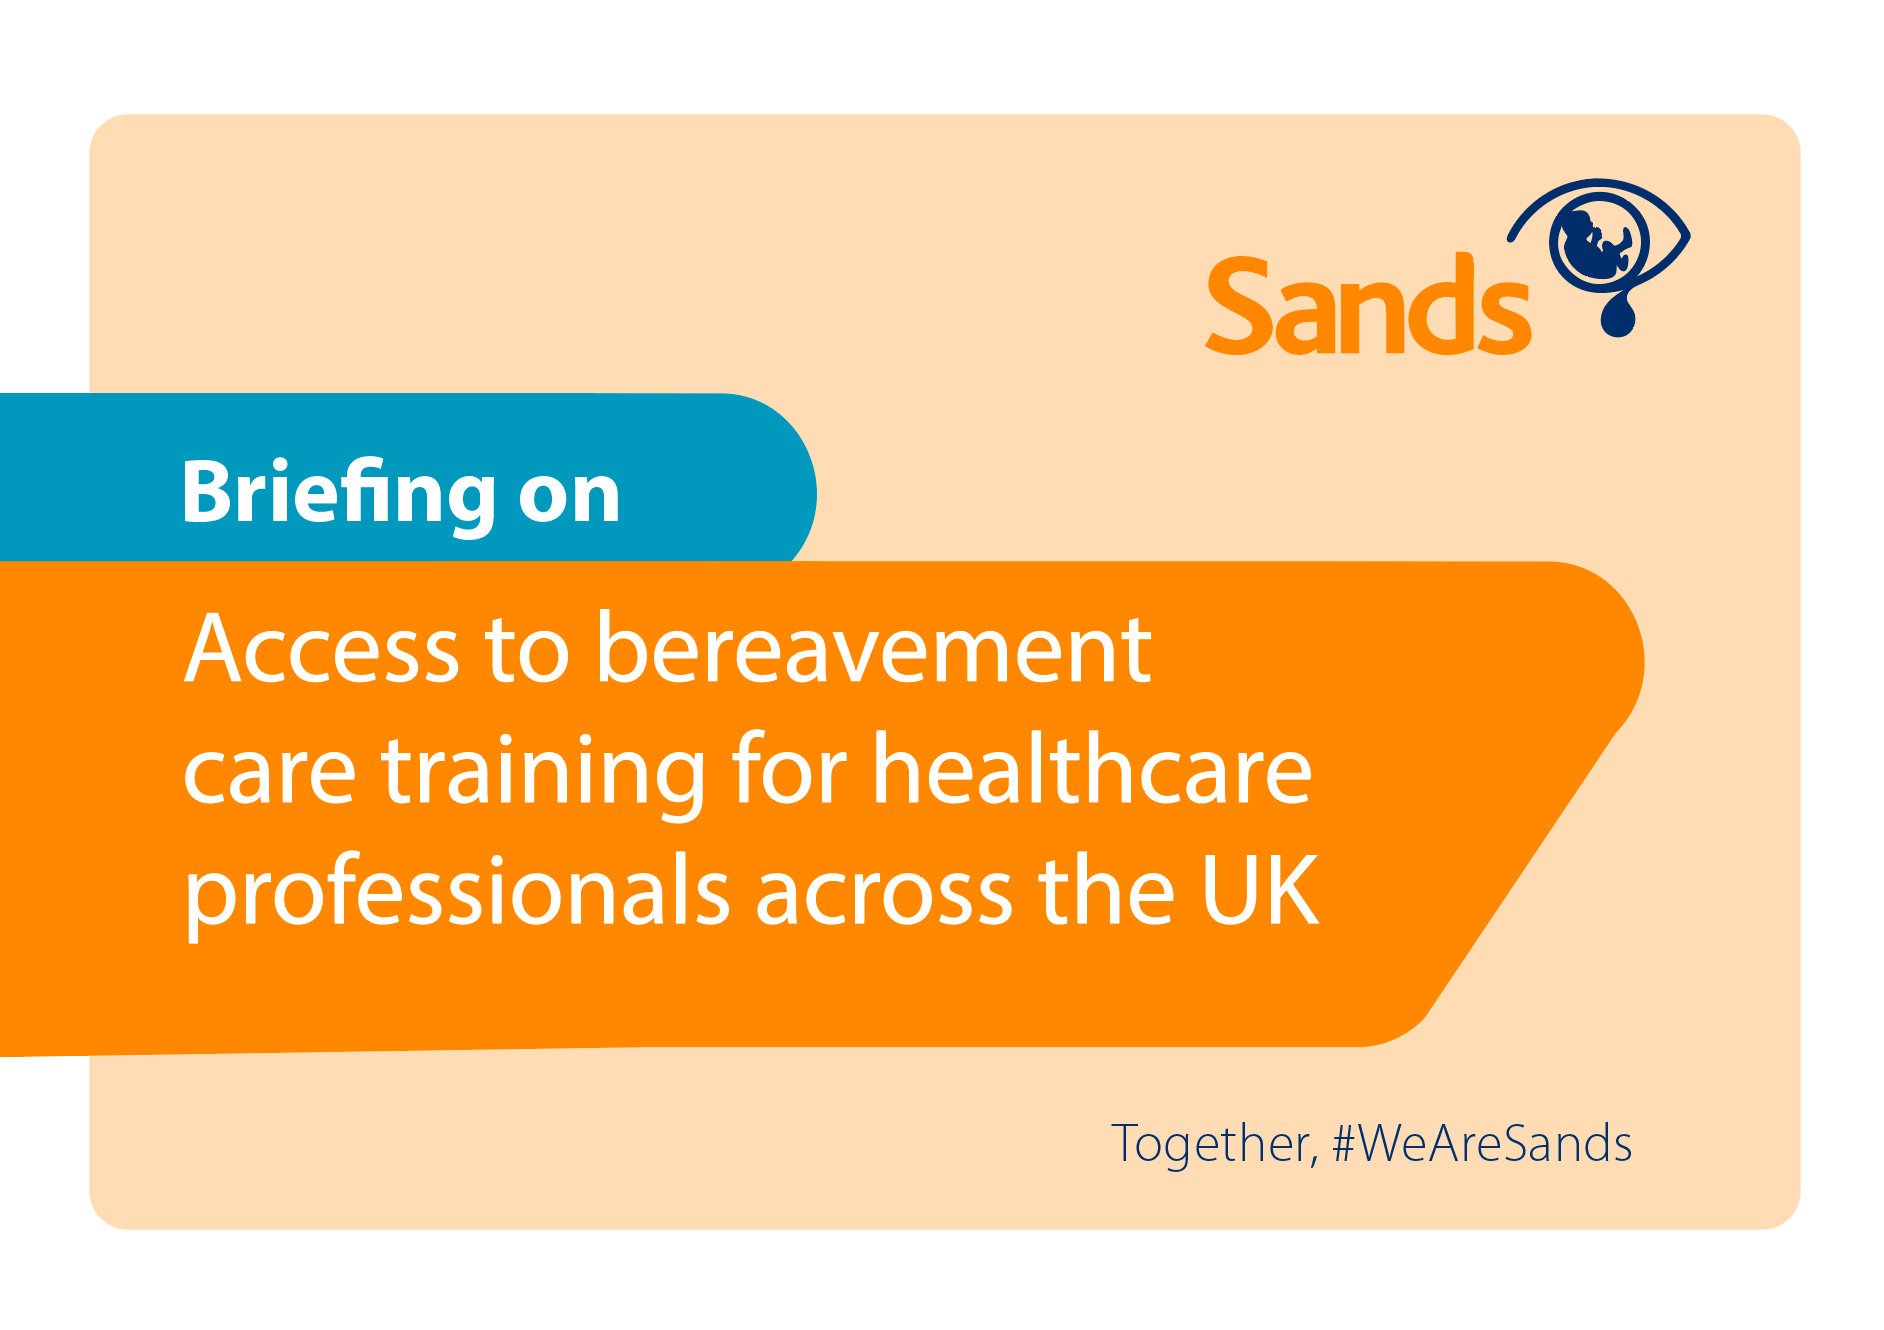 Briefing on Access to bereavement care training for healthcare professionals across the UK